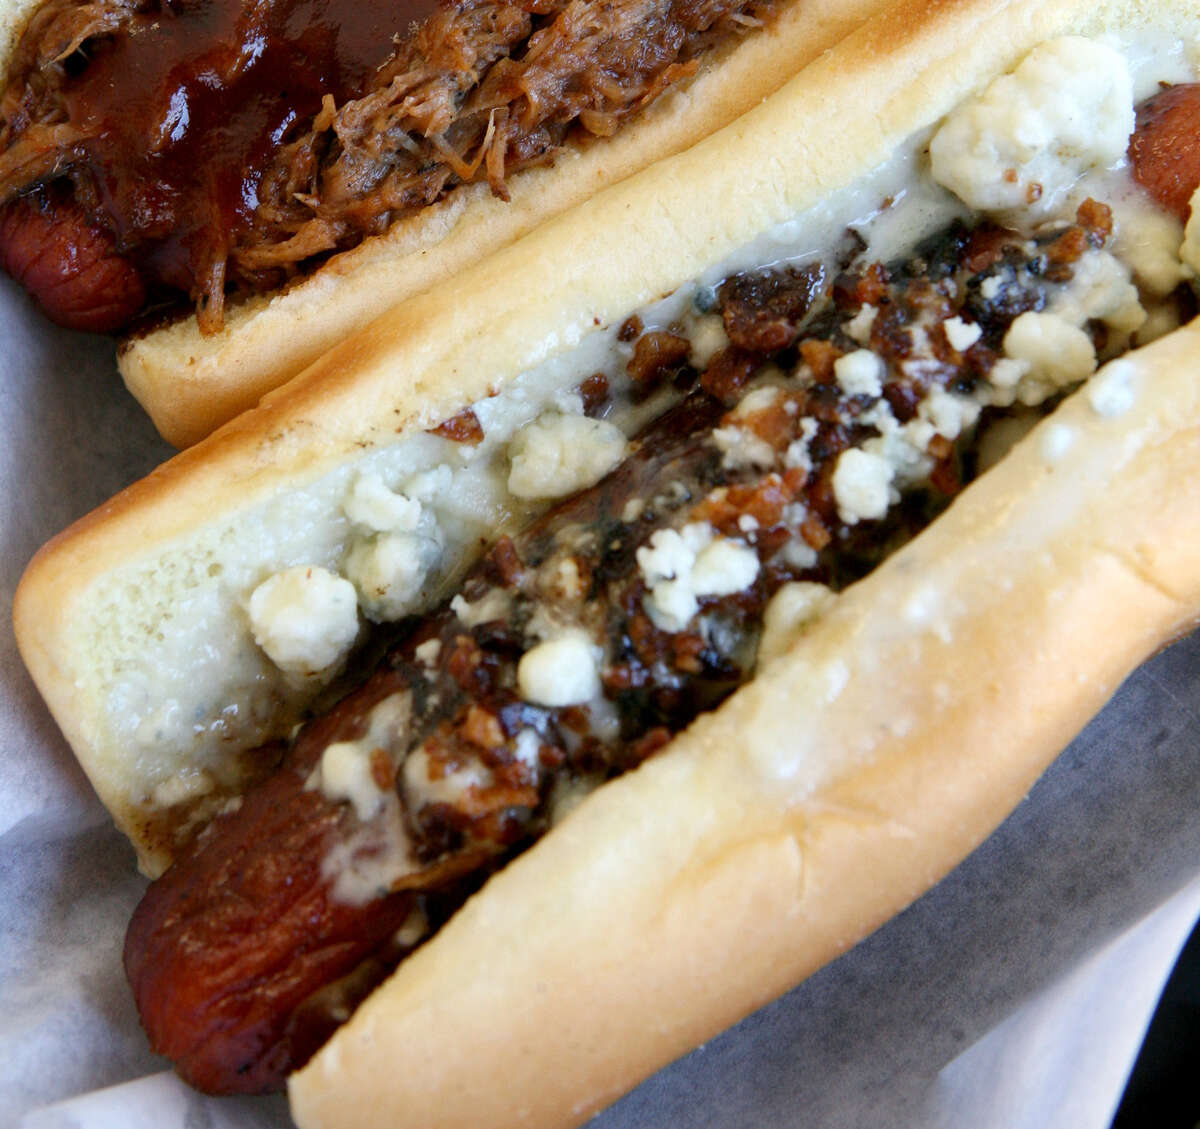 The pork dog (top) and the SA dog are served at the Original San Antonio Hot Dog House, which won Readers' Choice Best Hot Dog.